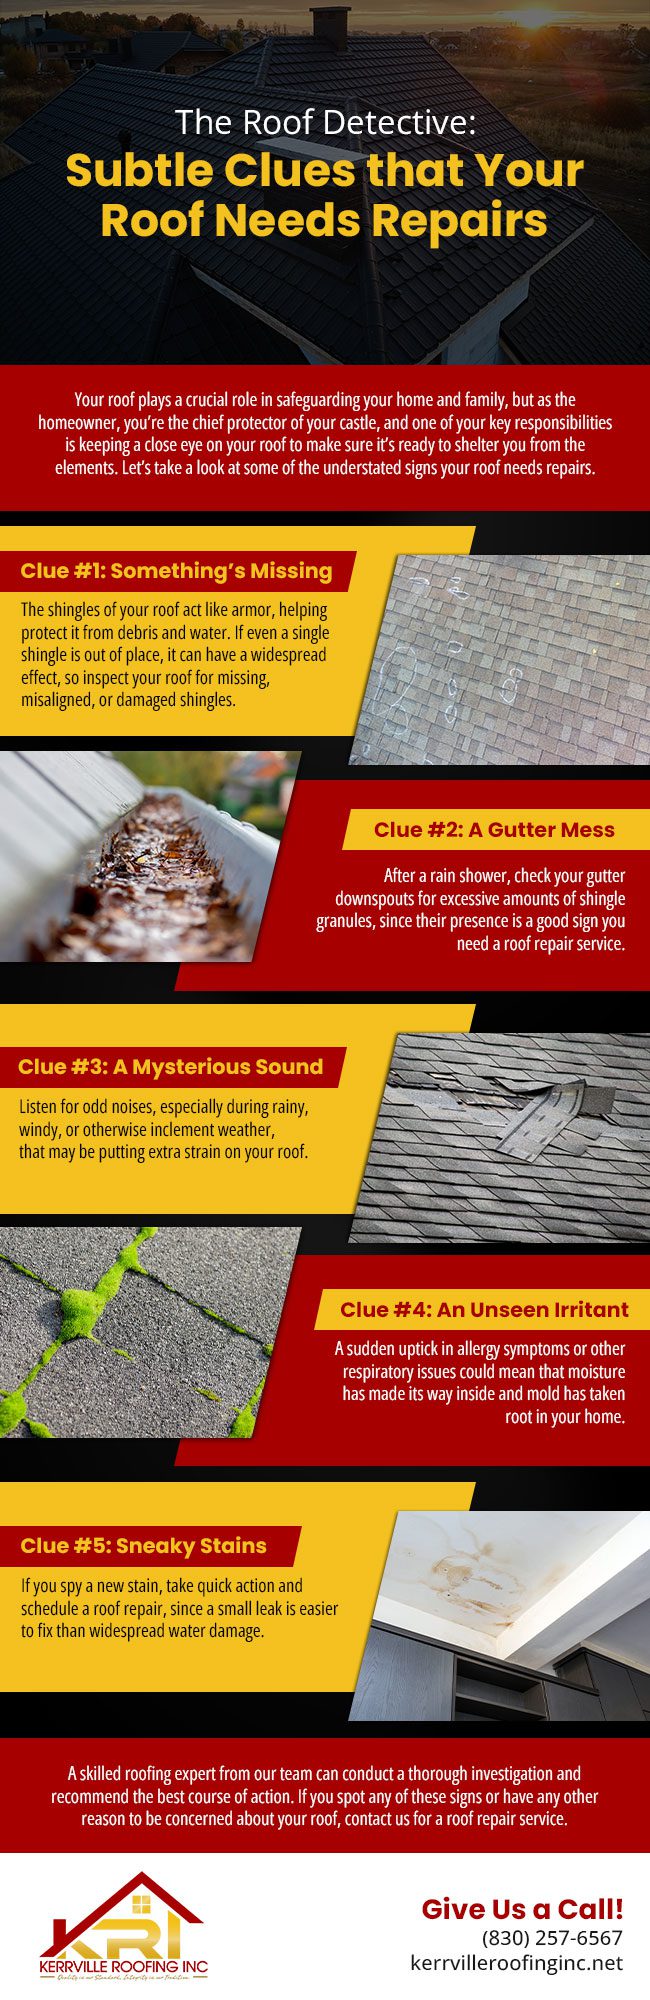  The Roof Detective: Subtle Clues that Your Roof Needs Repairs